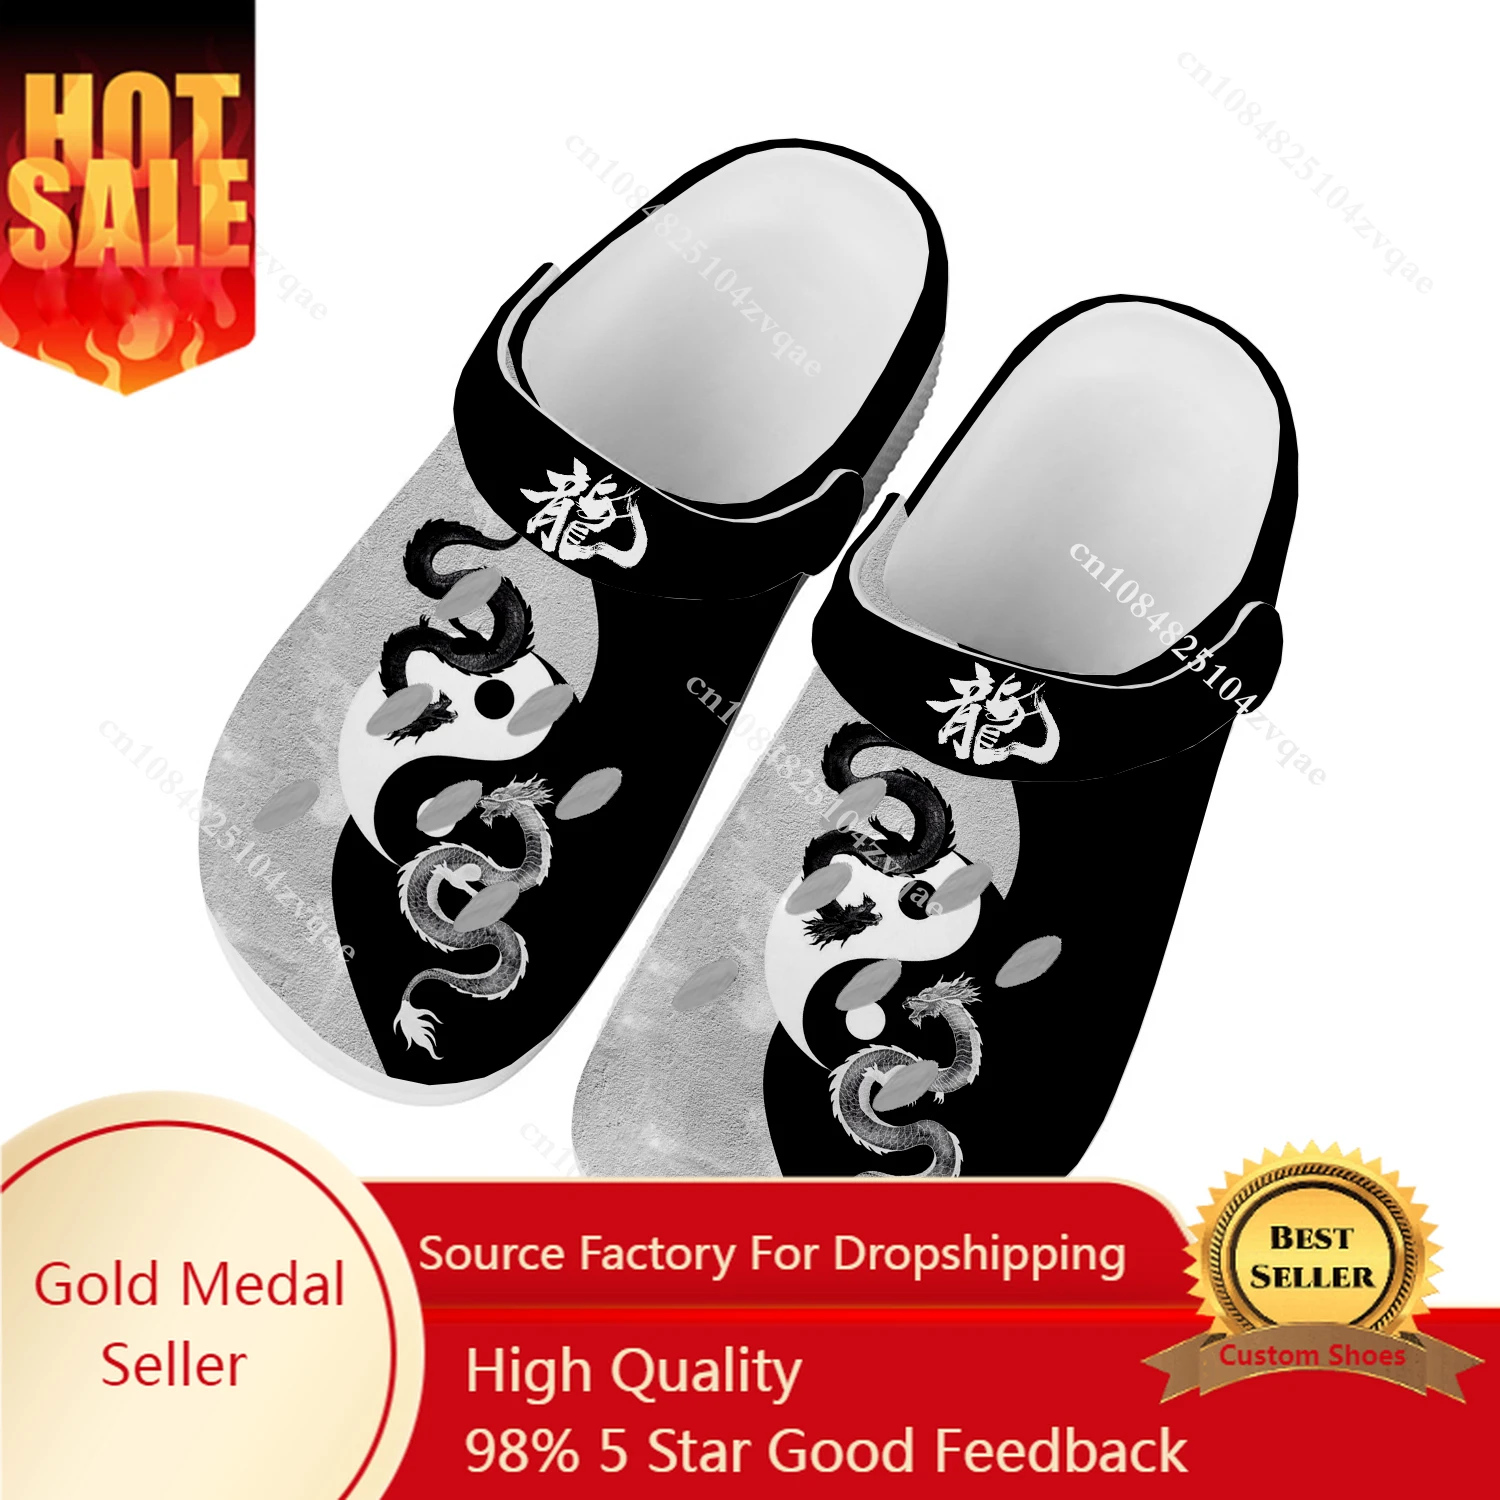 Dragon Pattern Design Home Clog Mens Women Youth Boy Girl Sandals Shoes Garden Custom Made Breathable Shoe Beach Hole Slippers sandals for women men trekking wading shoes breathable beach slippers fashion garden clog aqua shoes